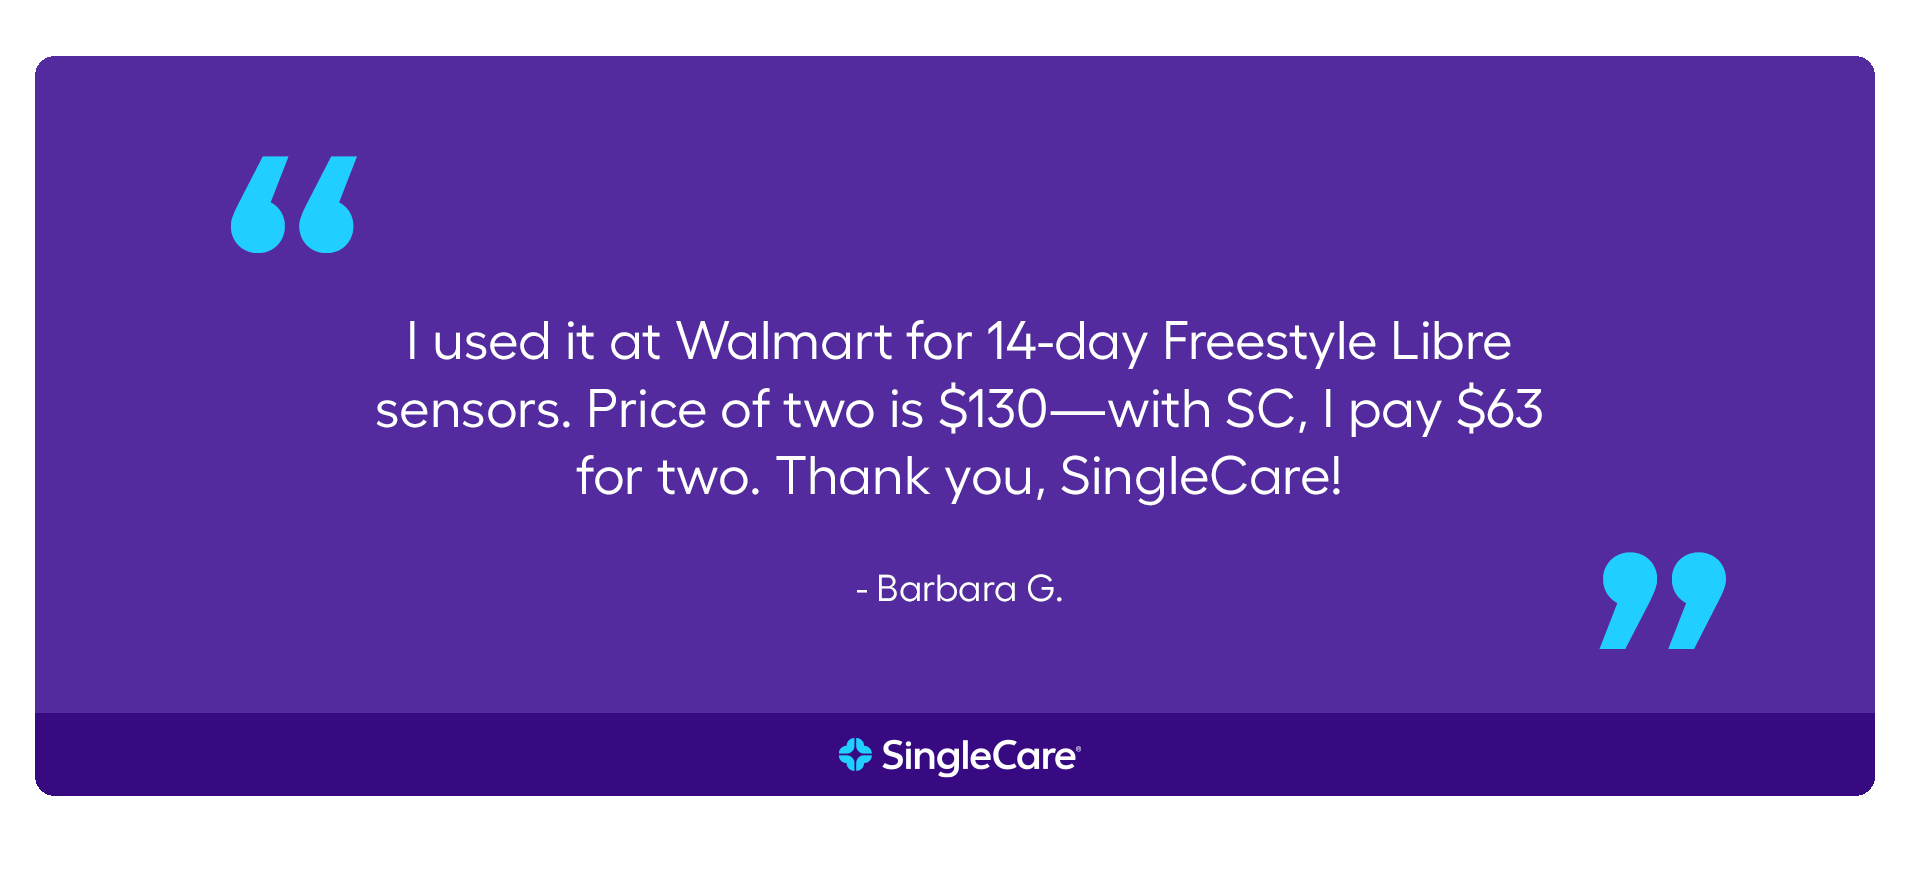 I used it at Walmart for 14-day FreeStyle Libre sensors. Price of two is $130—with SC, I pay $63 for two. Thank you, SingleCare!